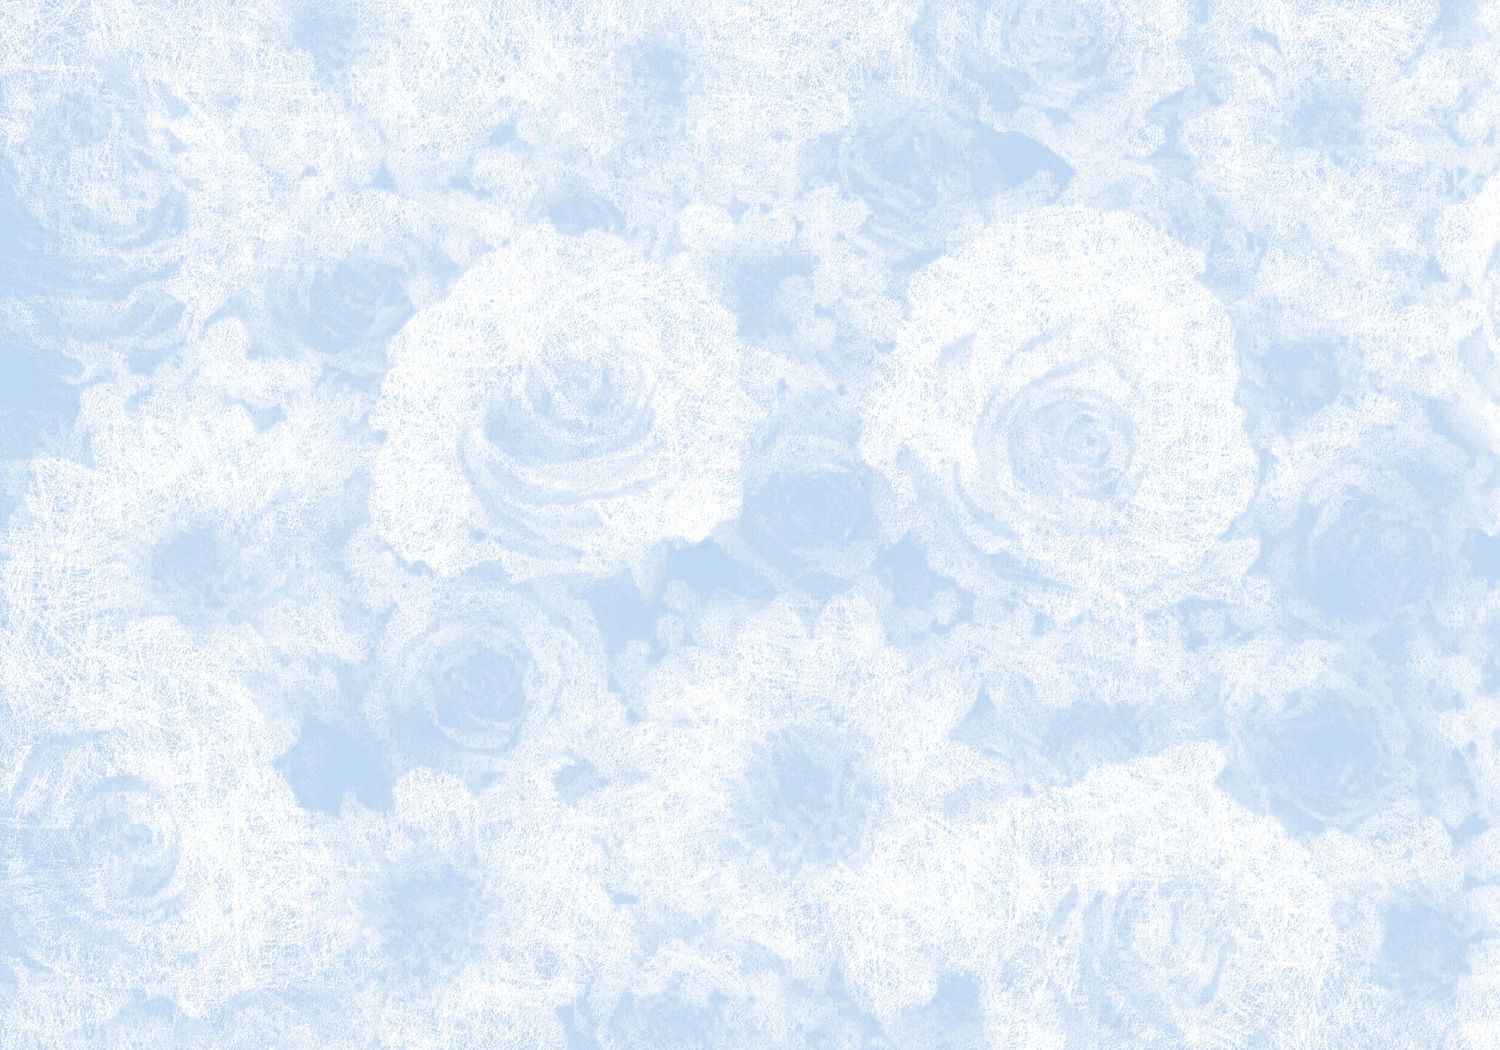 Roses painted in white pastel on blue background